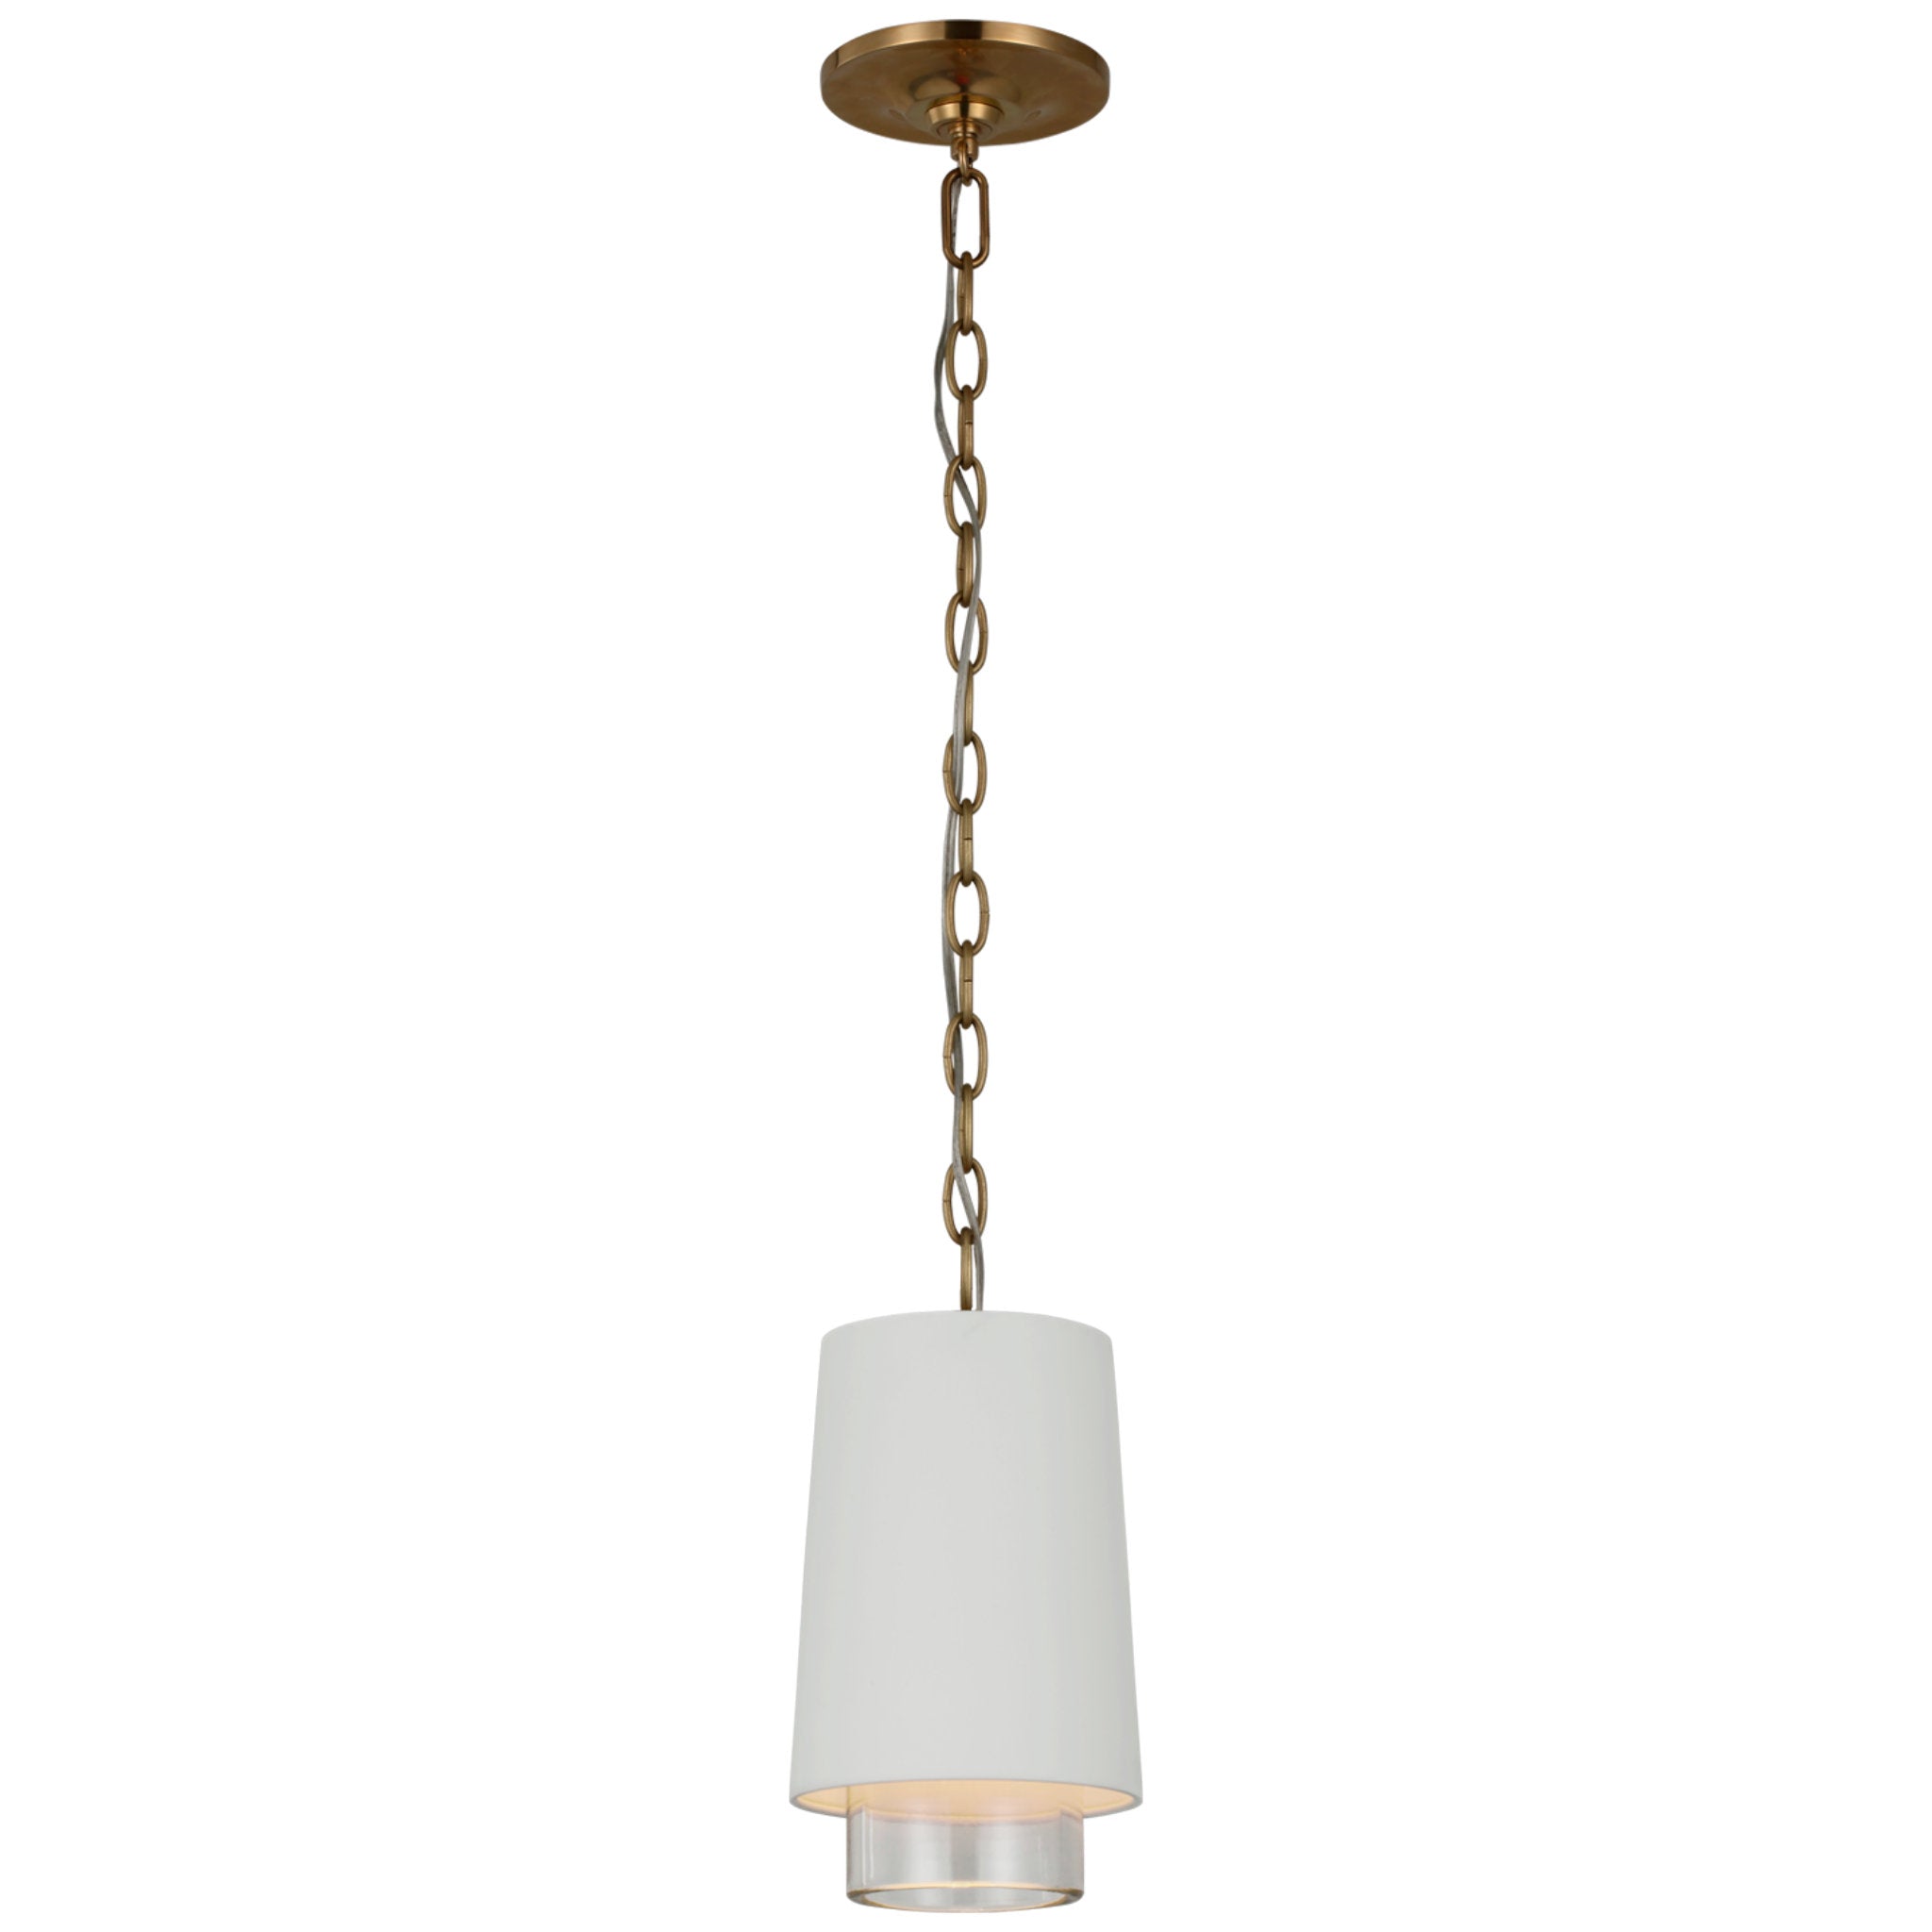 Marie Flanigan Sydney Narrow Pendant in Soft Brass with Matte White and Clear Glass